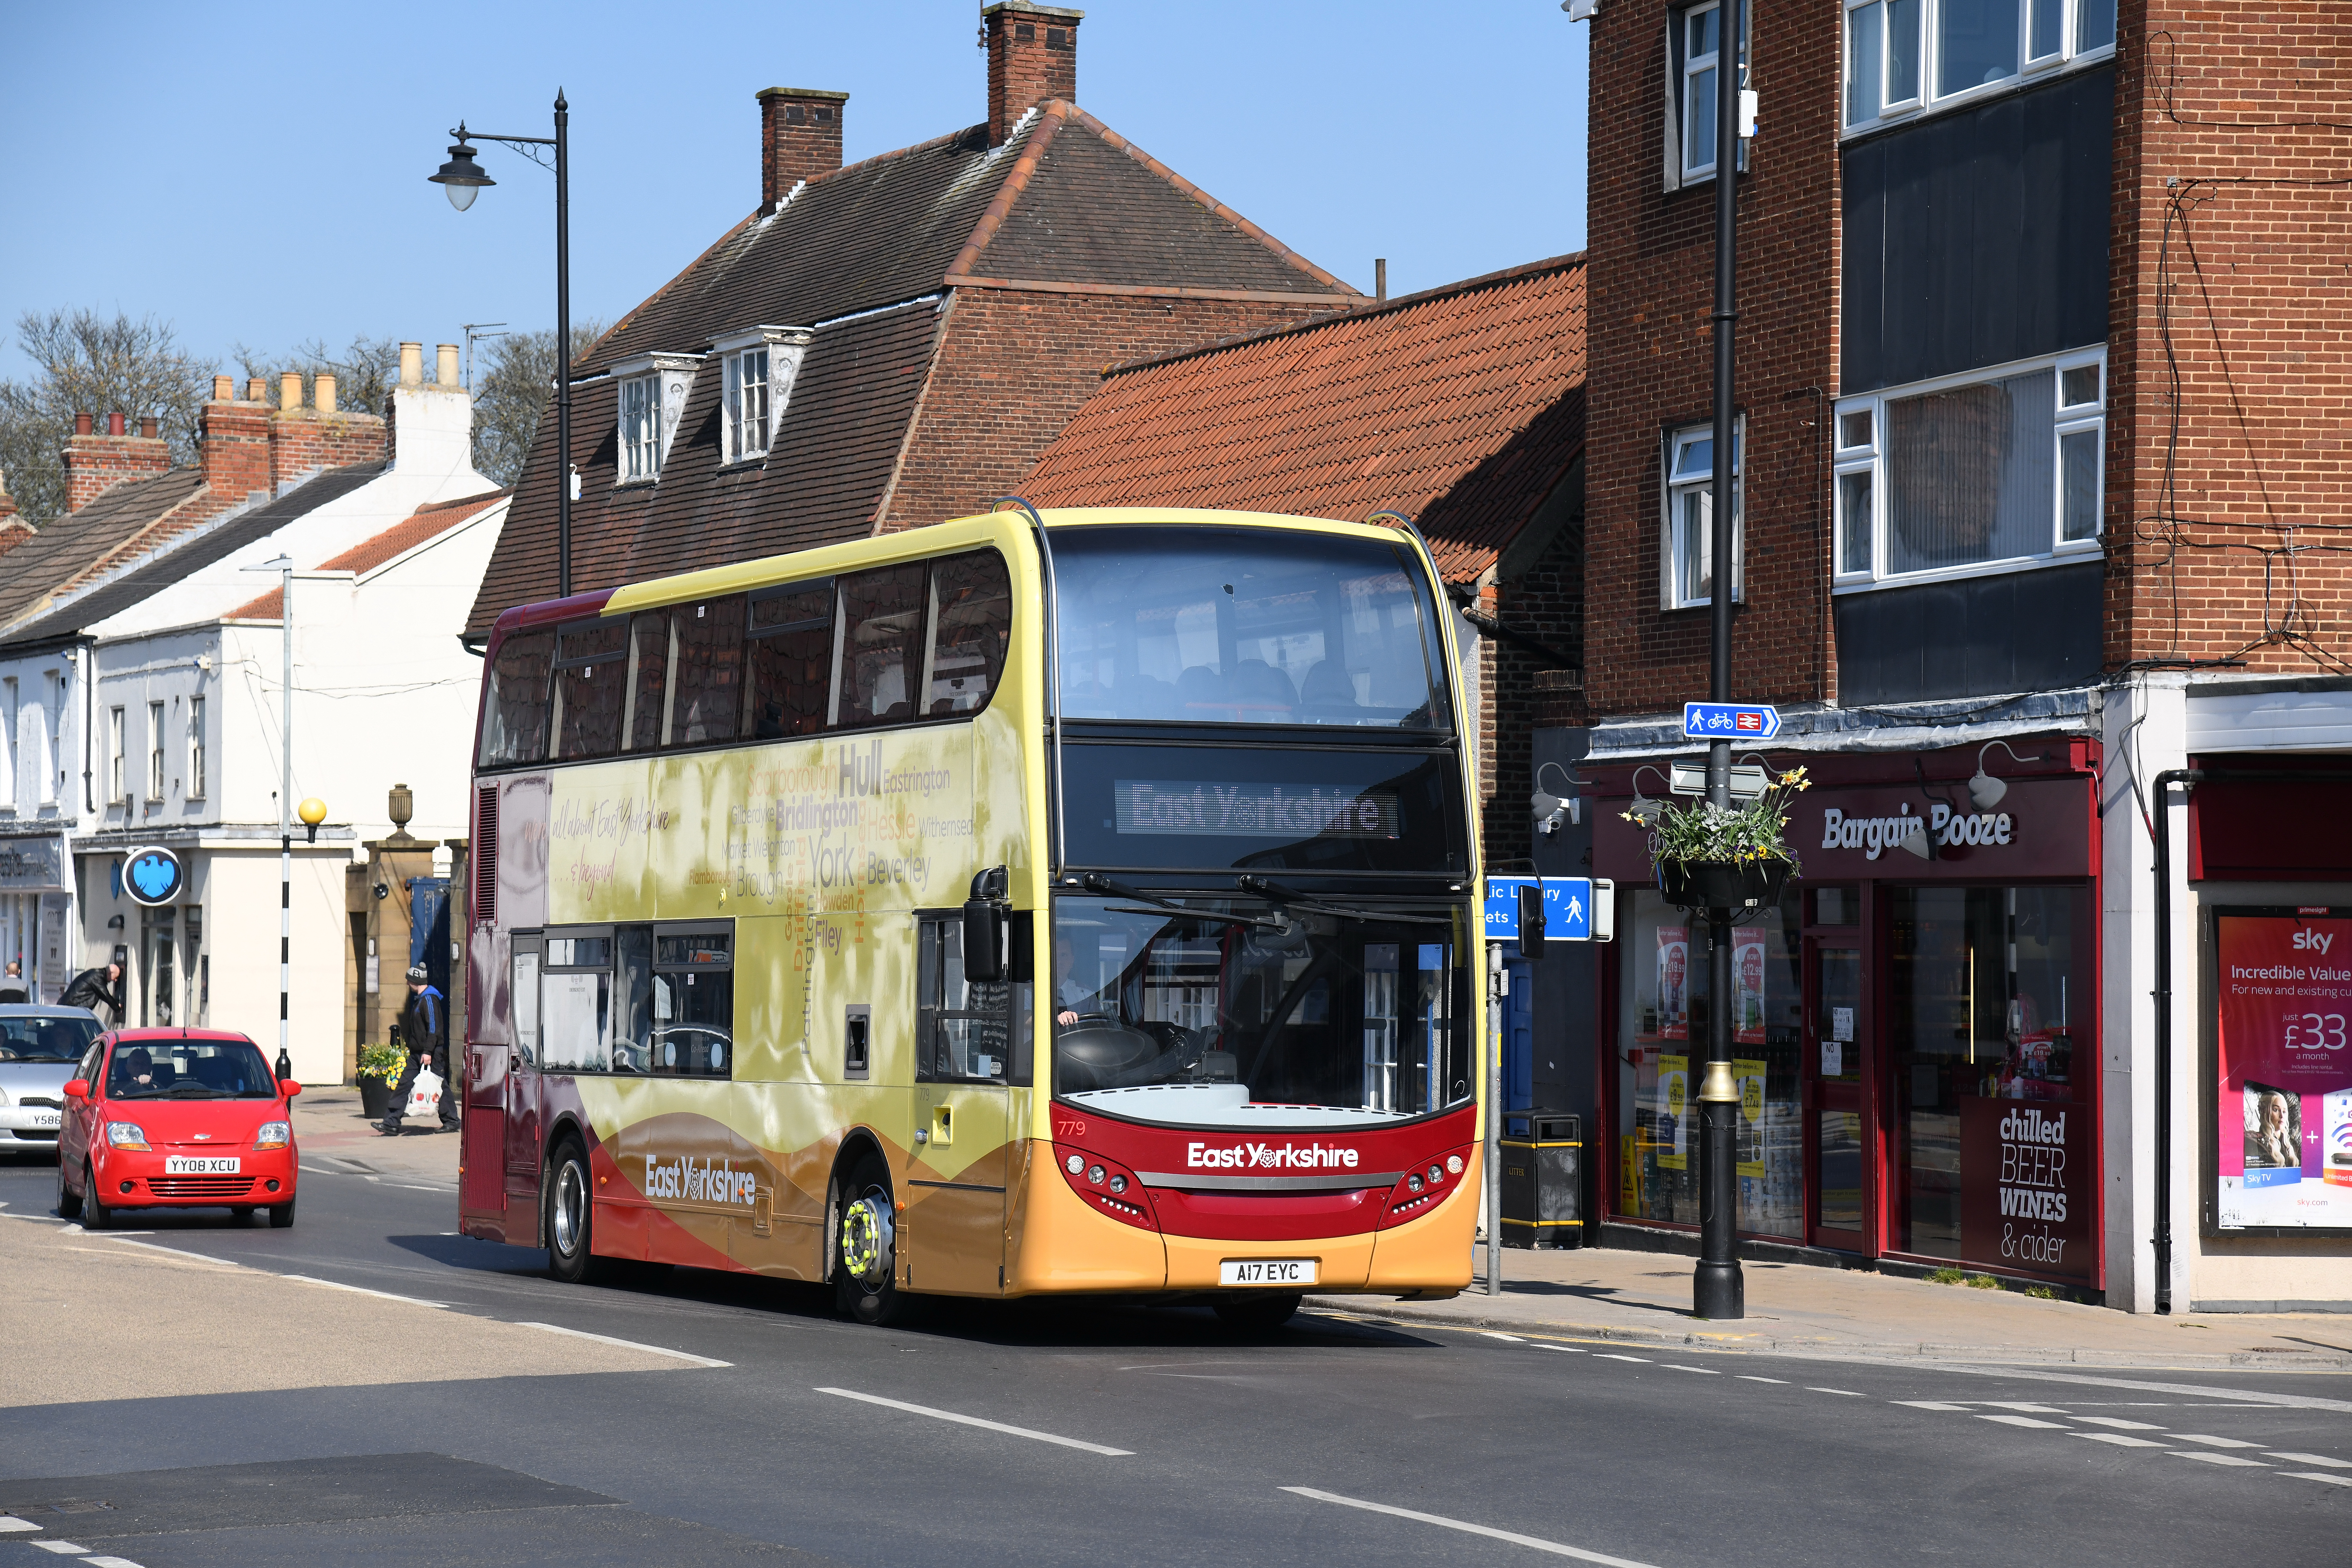 Yellow and red double decker bus